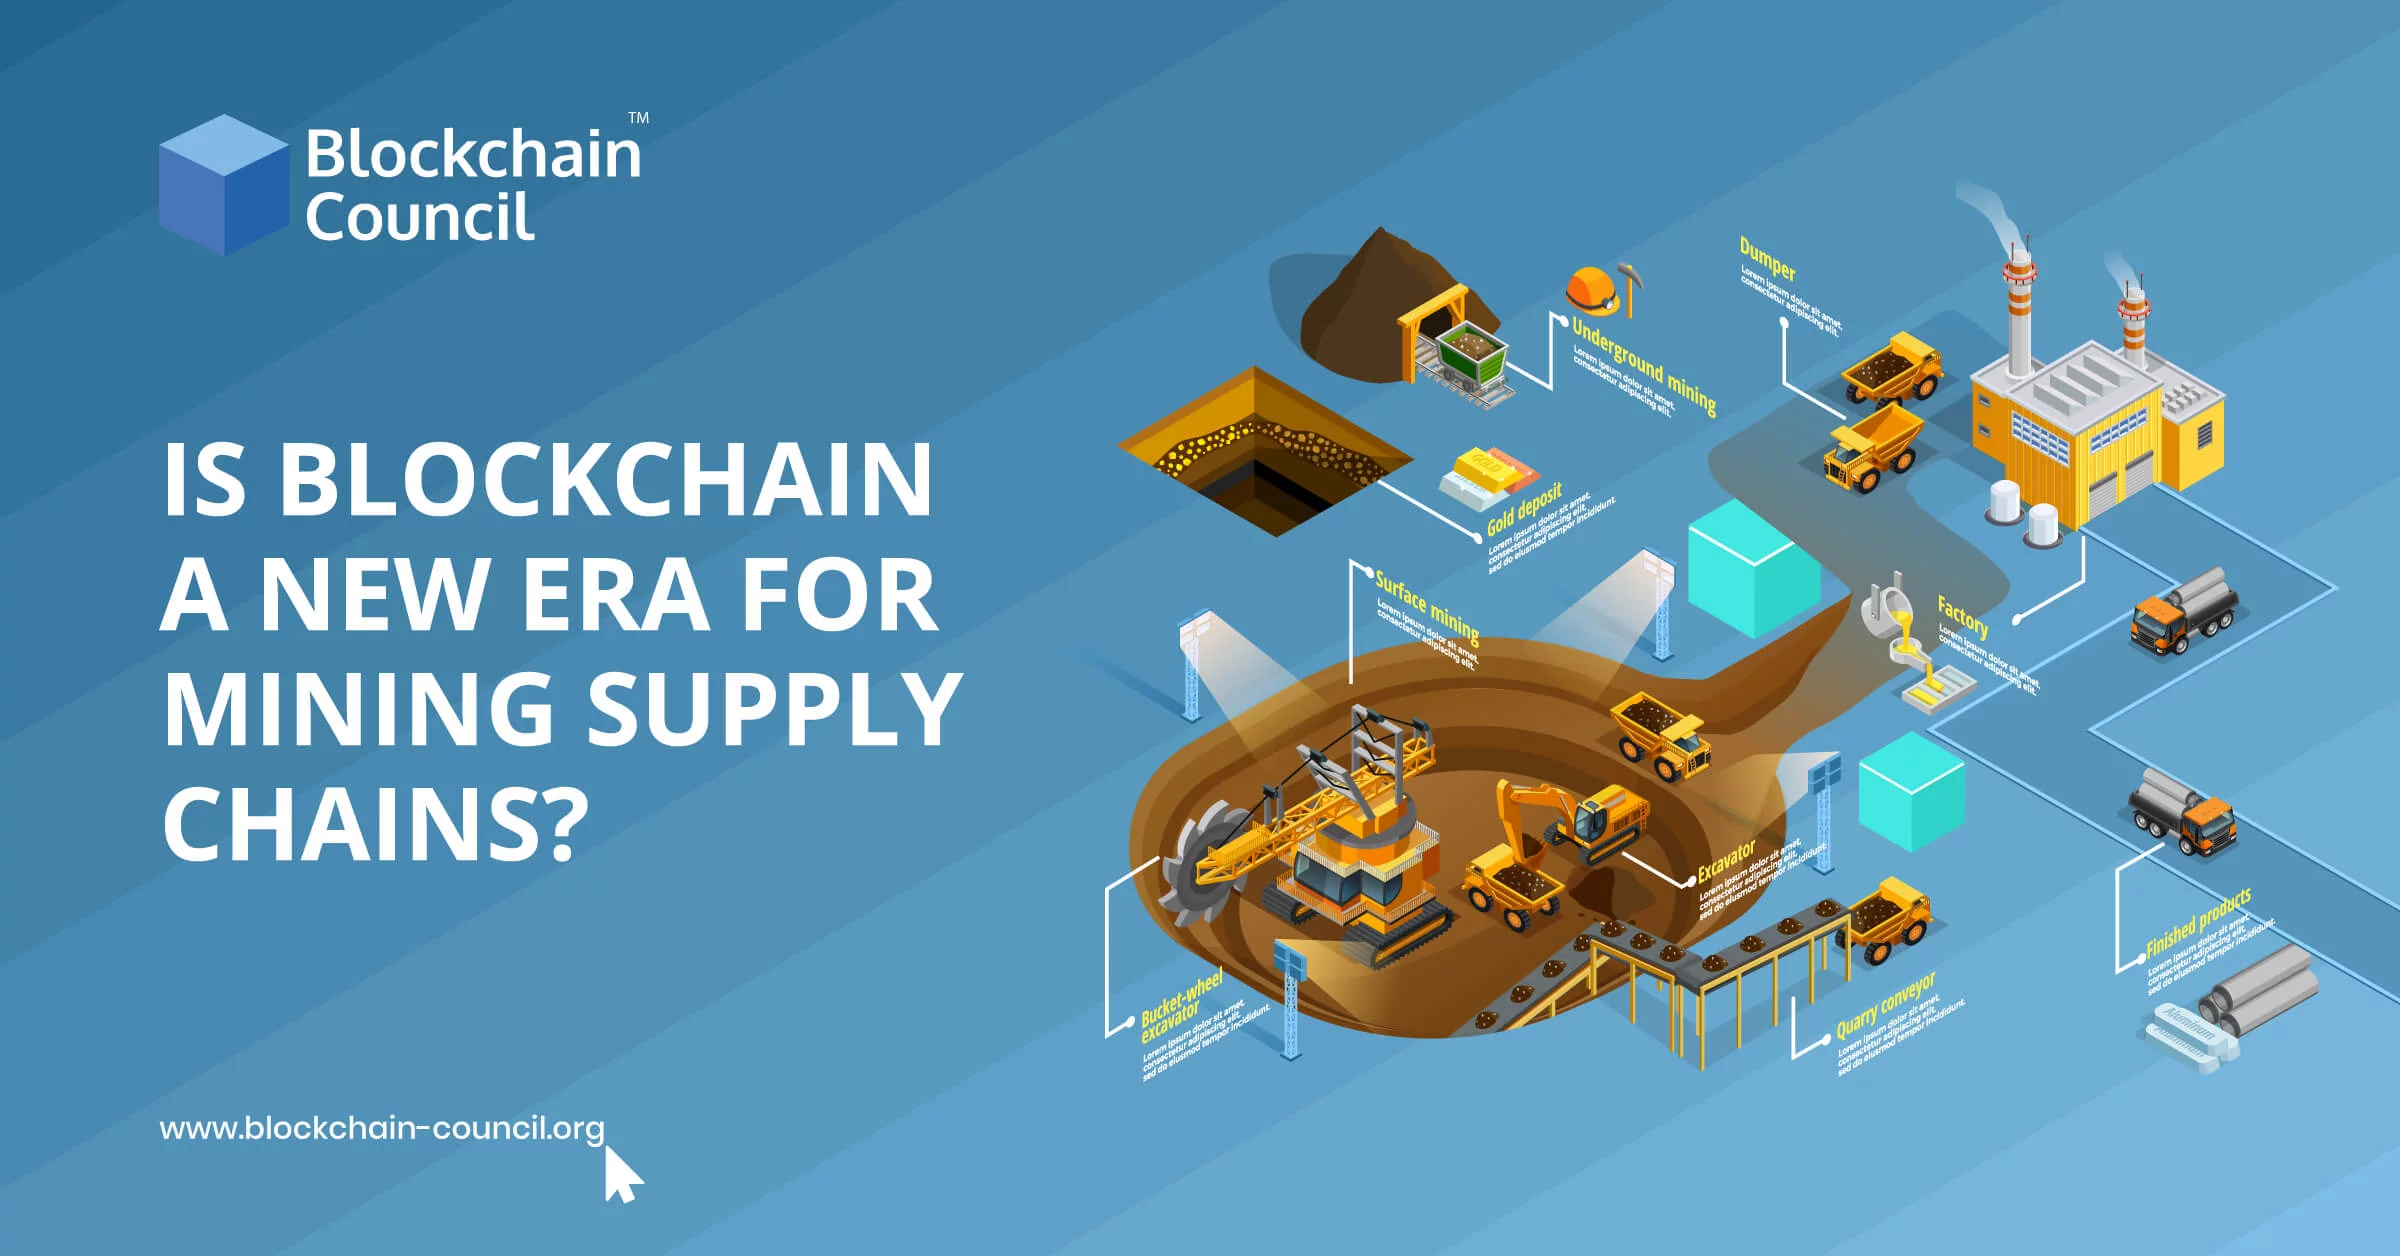 IS BLOCKCHAIN A NEW ERA FOR MINING SUPPLY CHAINS?